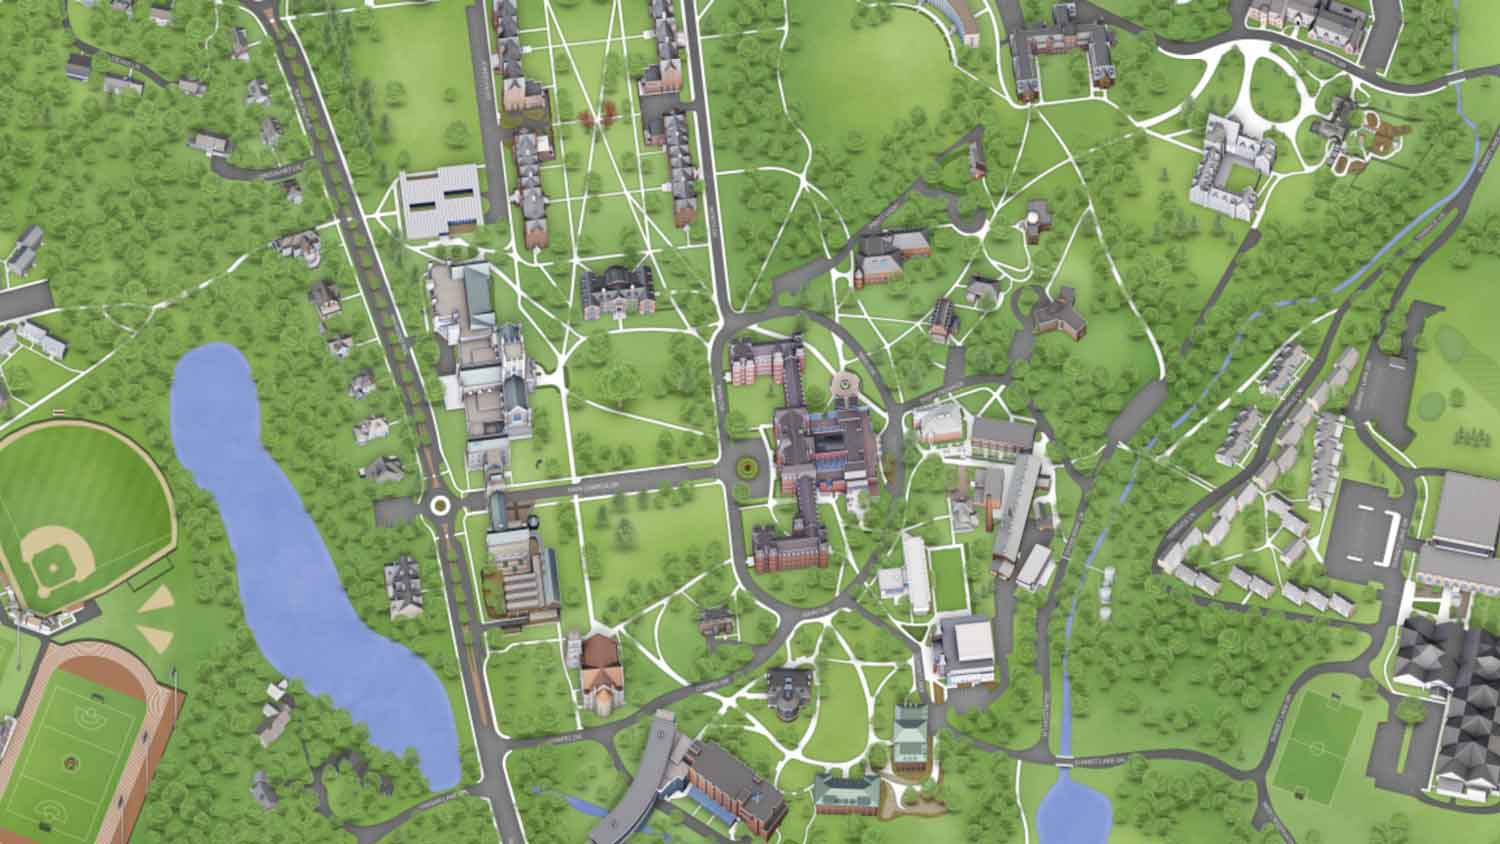 Illustrative aerial view of an incomplete Vassar Campus map